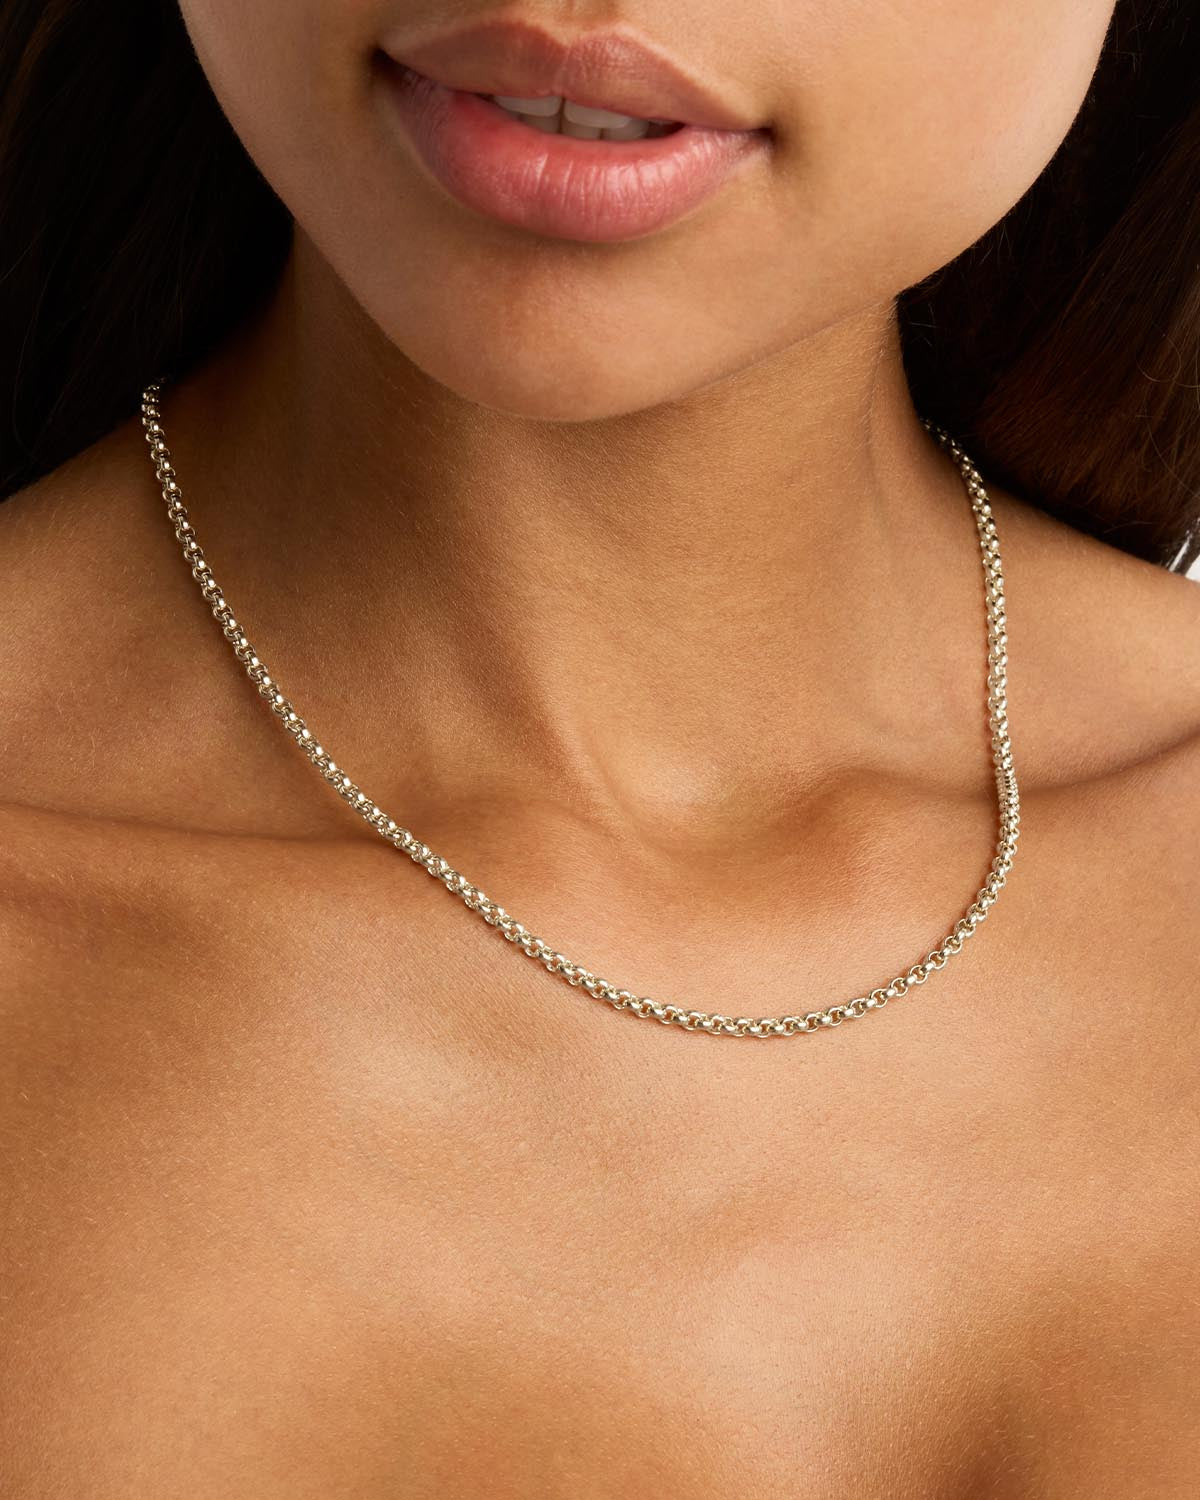 Rope Chain Tennis Necklace - 4NFJ1PDMTL - Sorrelli